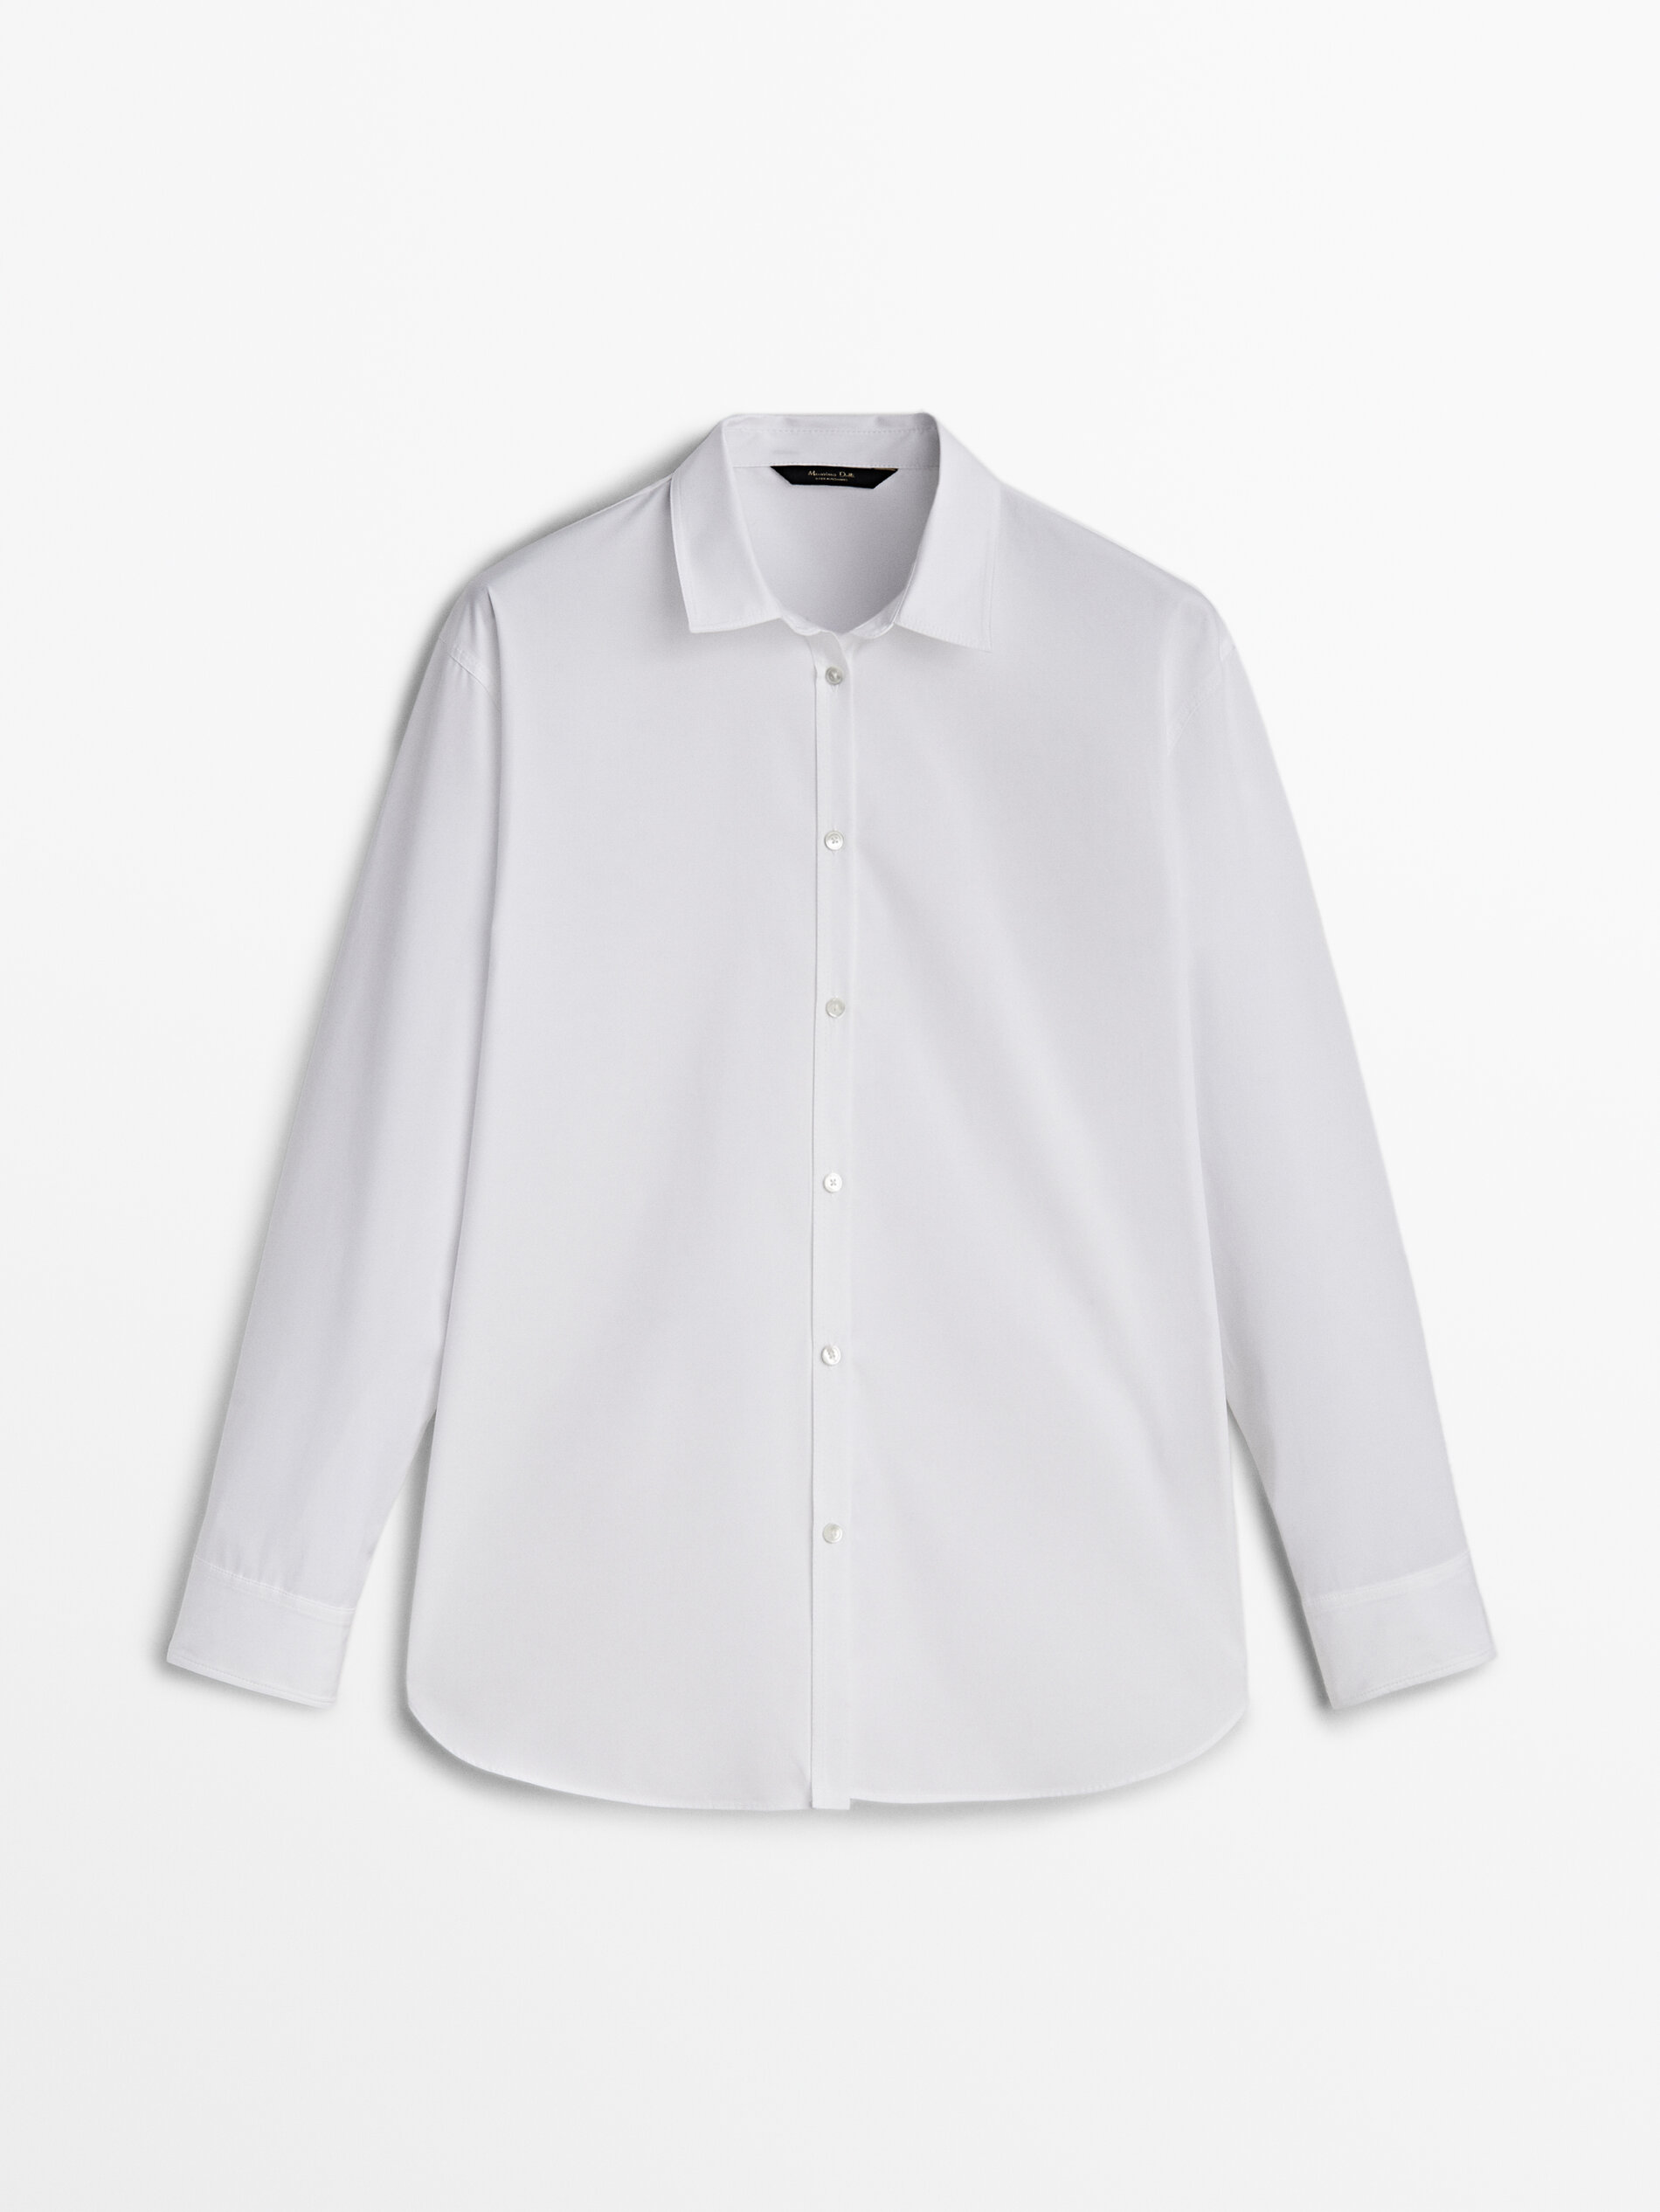 Buy Men's Tailored Shirts Online | Made-To-Measure Branded Shirts